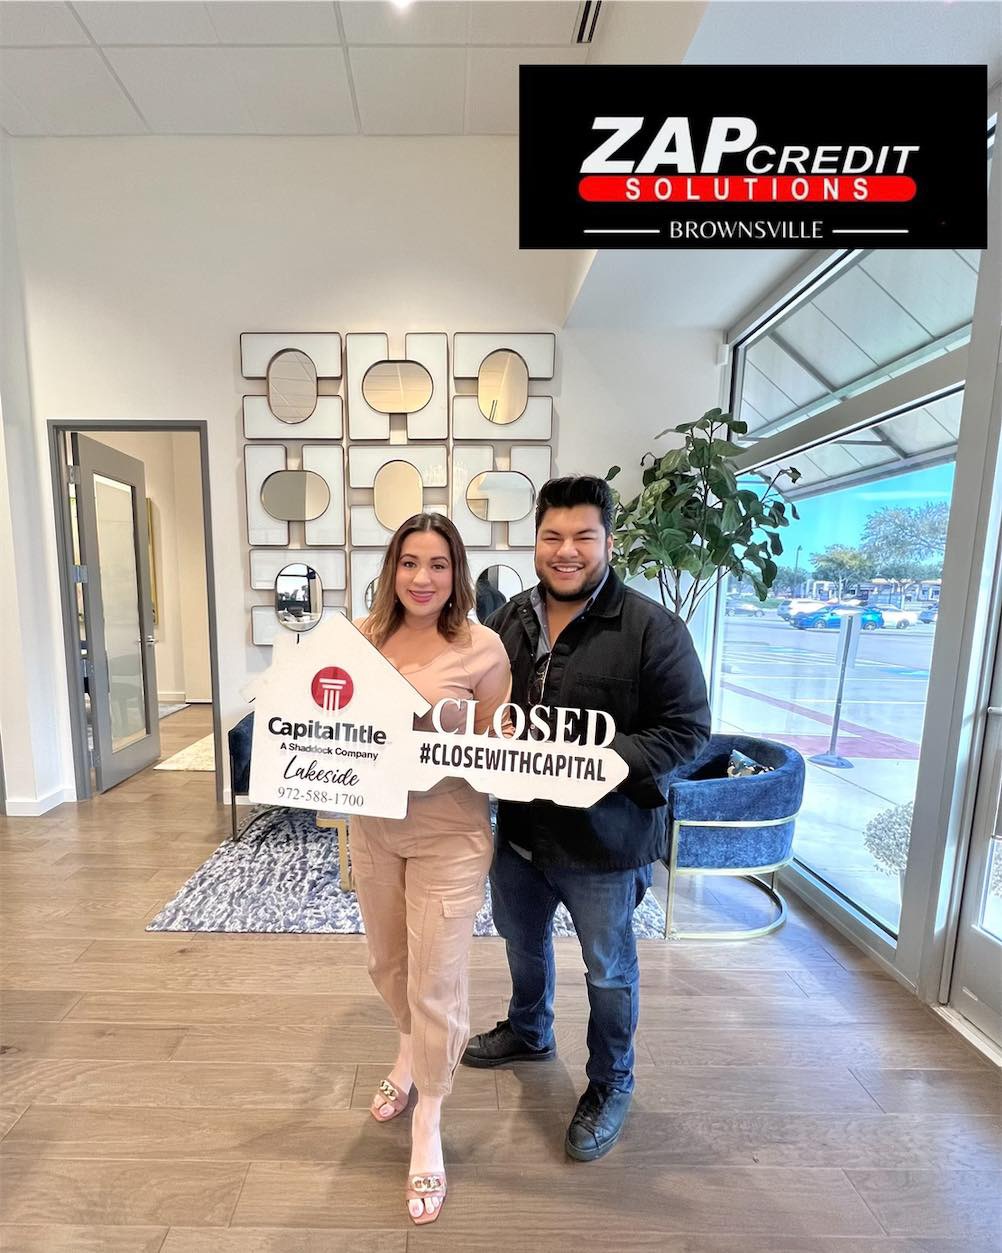 Zap Credit Solutions Brownsville